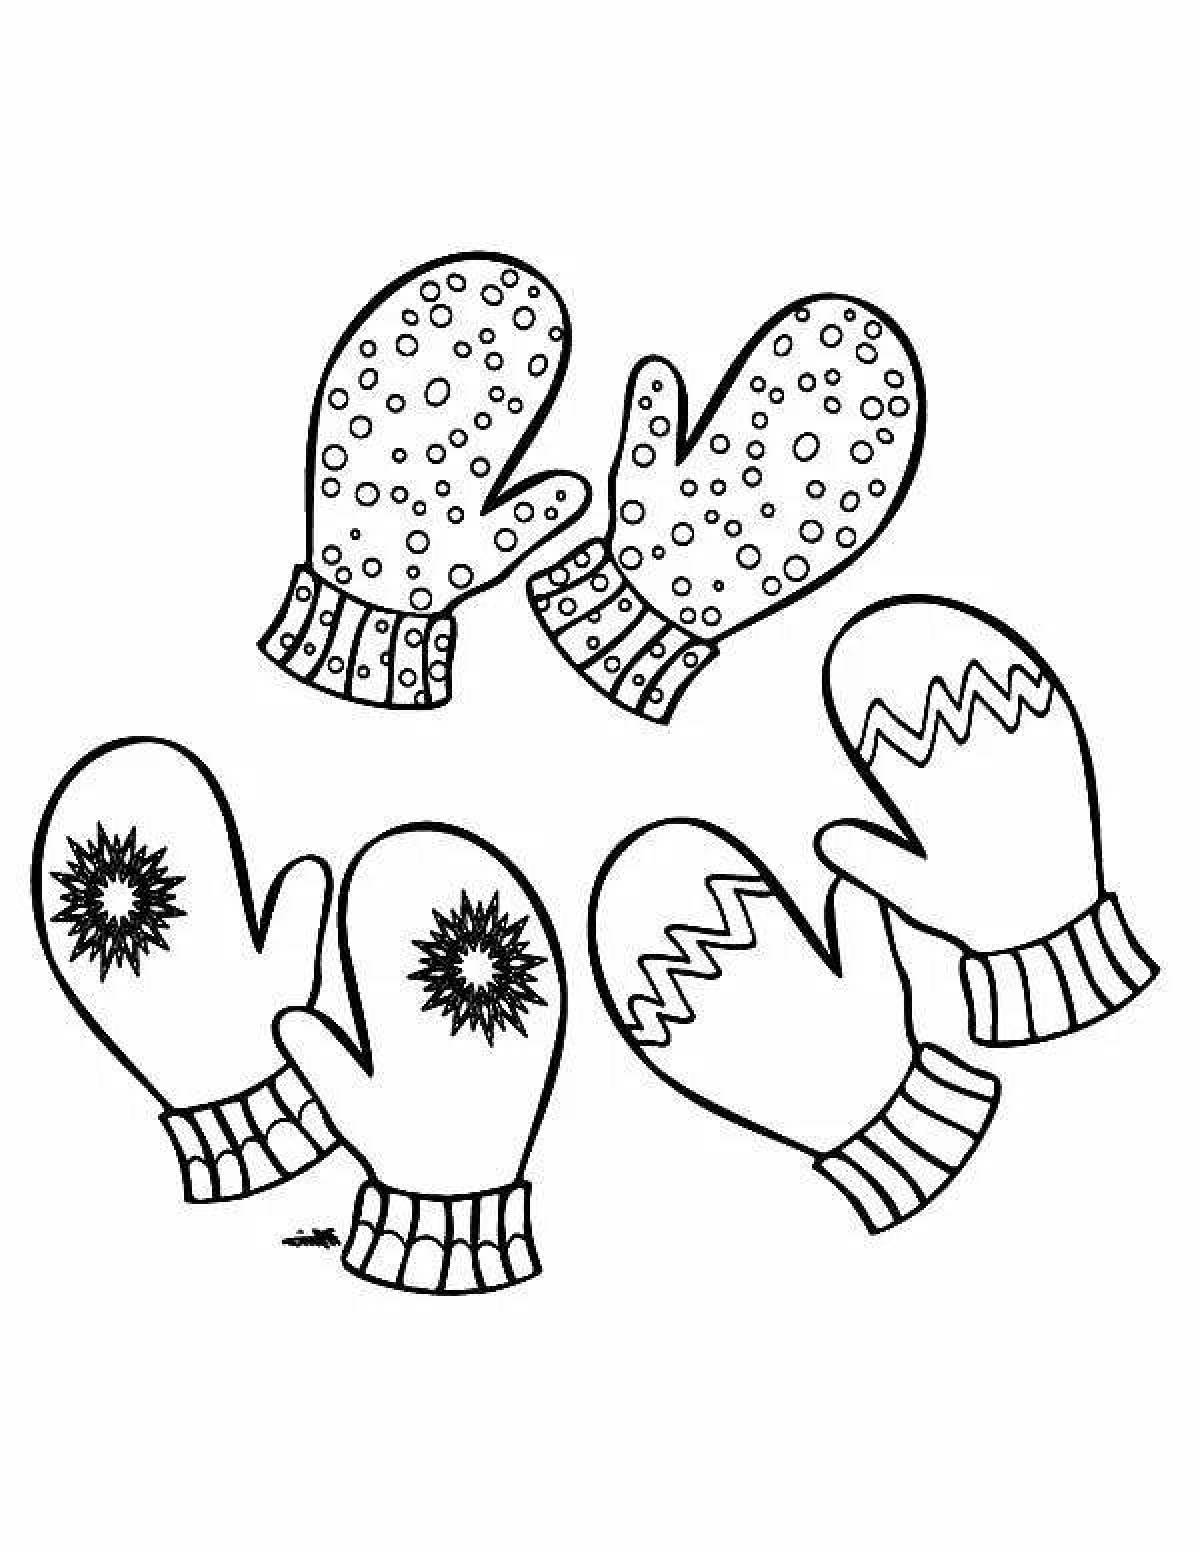 Colored mittens with colored splashes for 2-3 year olds